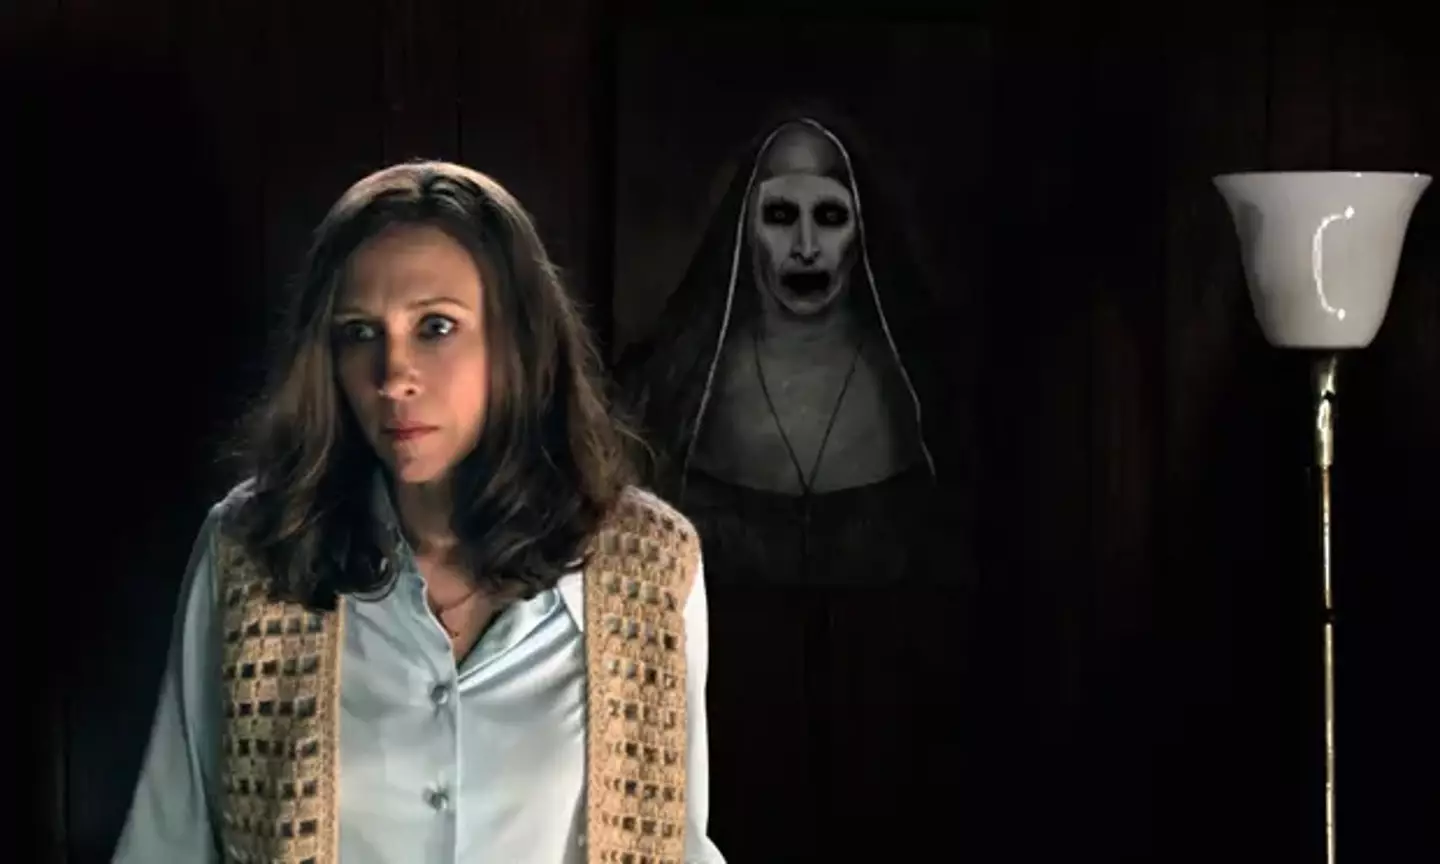 The Enfield haunting inspired The Conjuring 2.